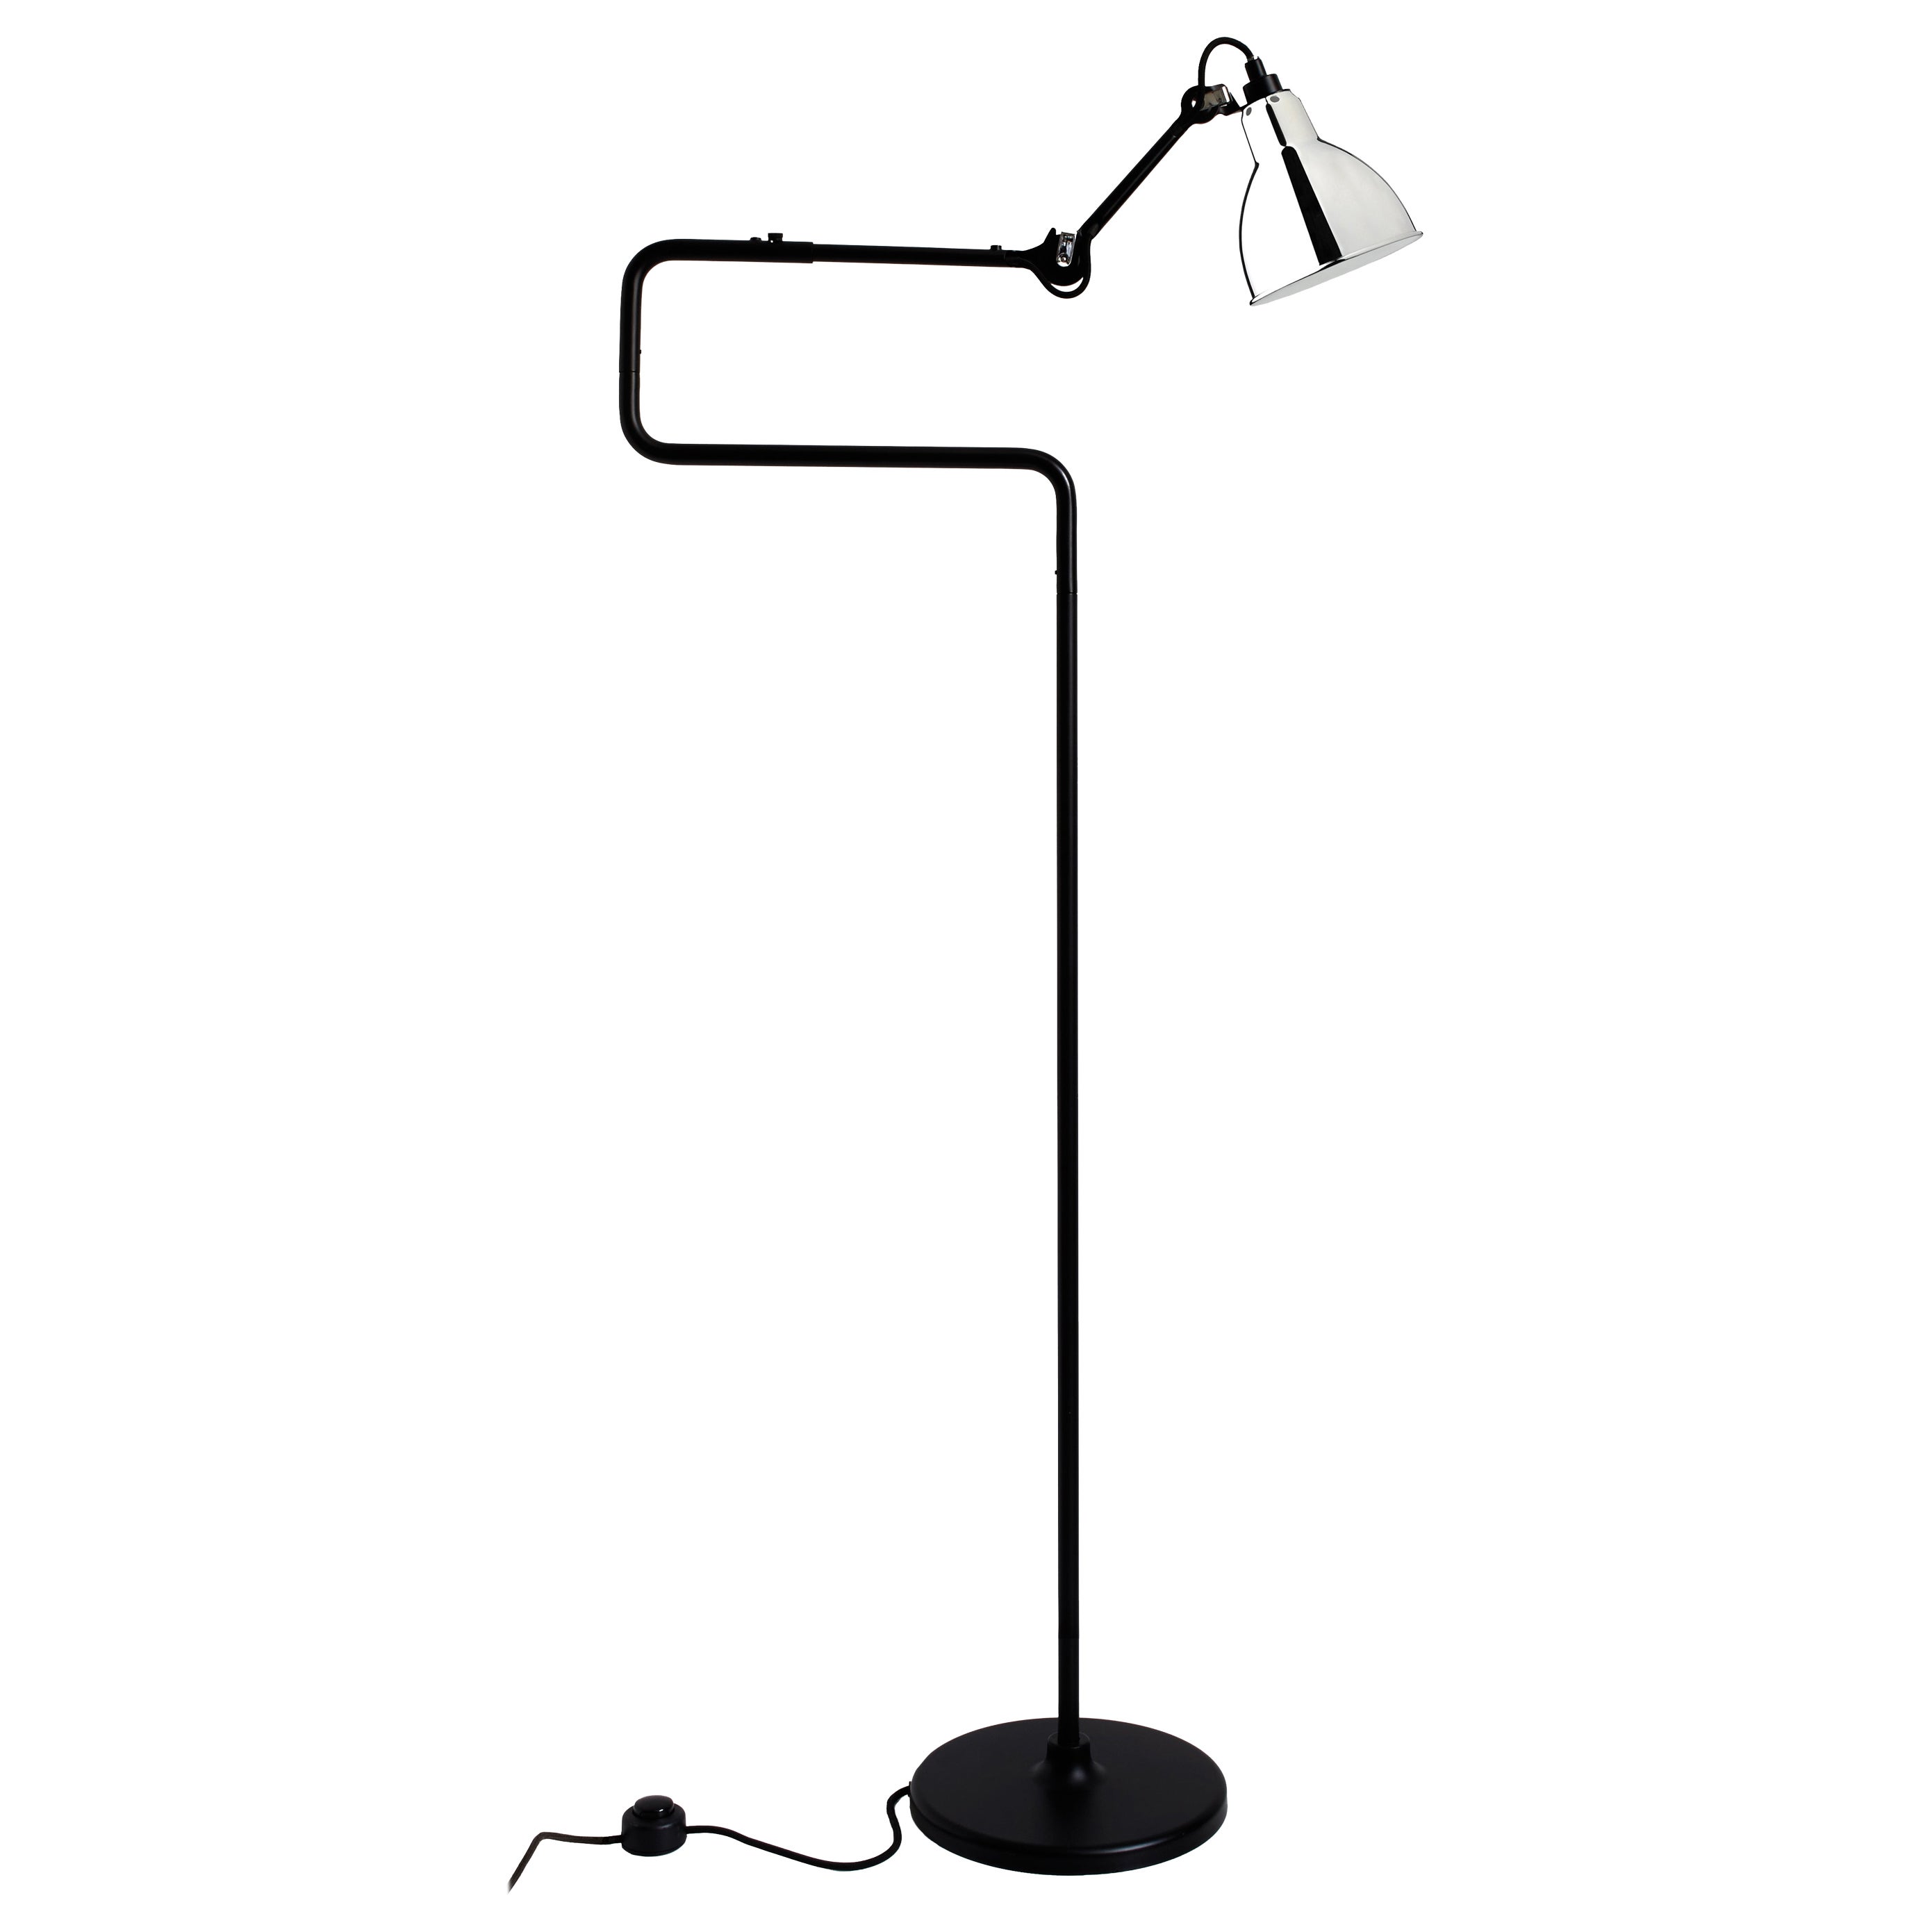 DCW Editions La Lampe Gras N°411 Floor Lamp in Black Arm and Chrome Shade For Sale